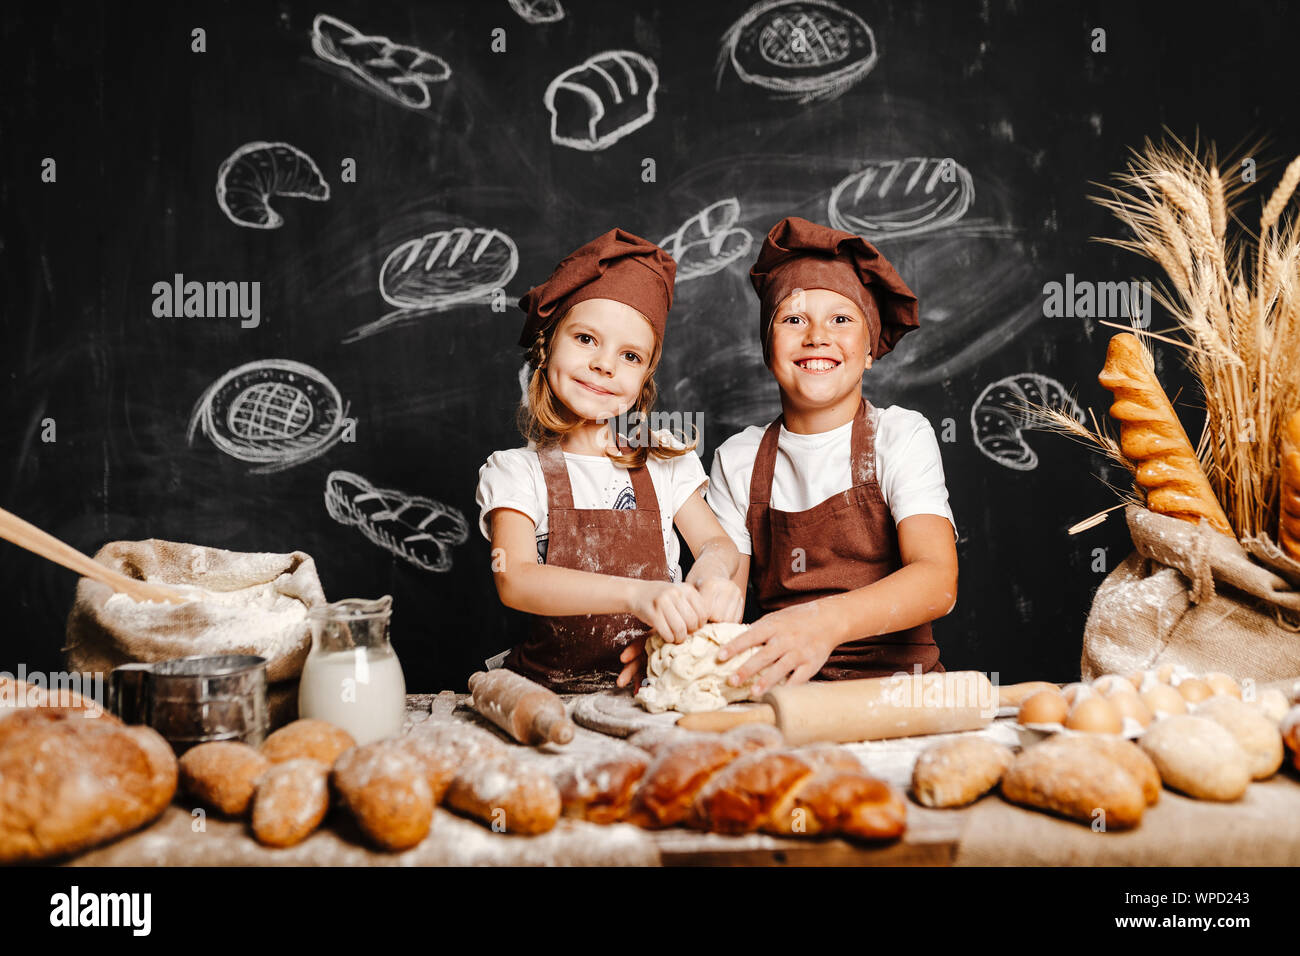 Adorable girl with brother in aprons on table with bread loaves making fresh dough and having fun Stock Photo